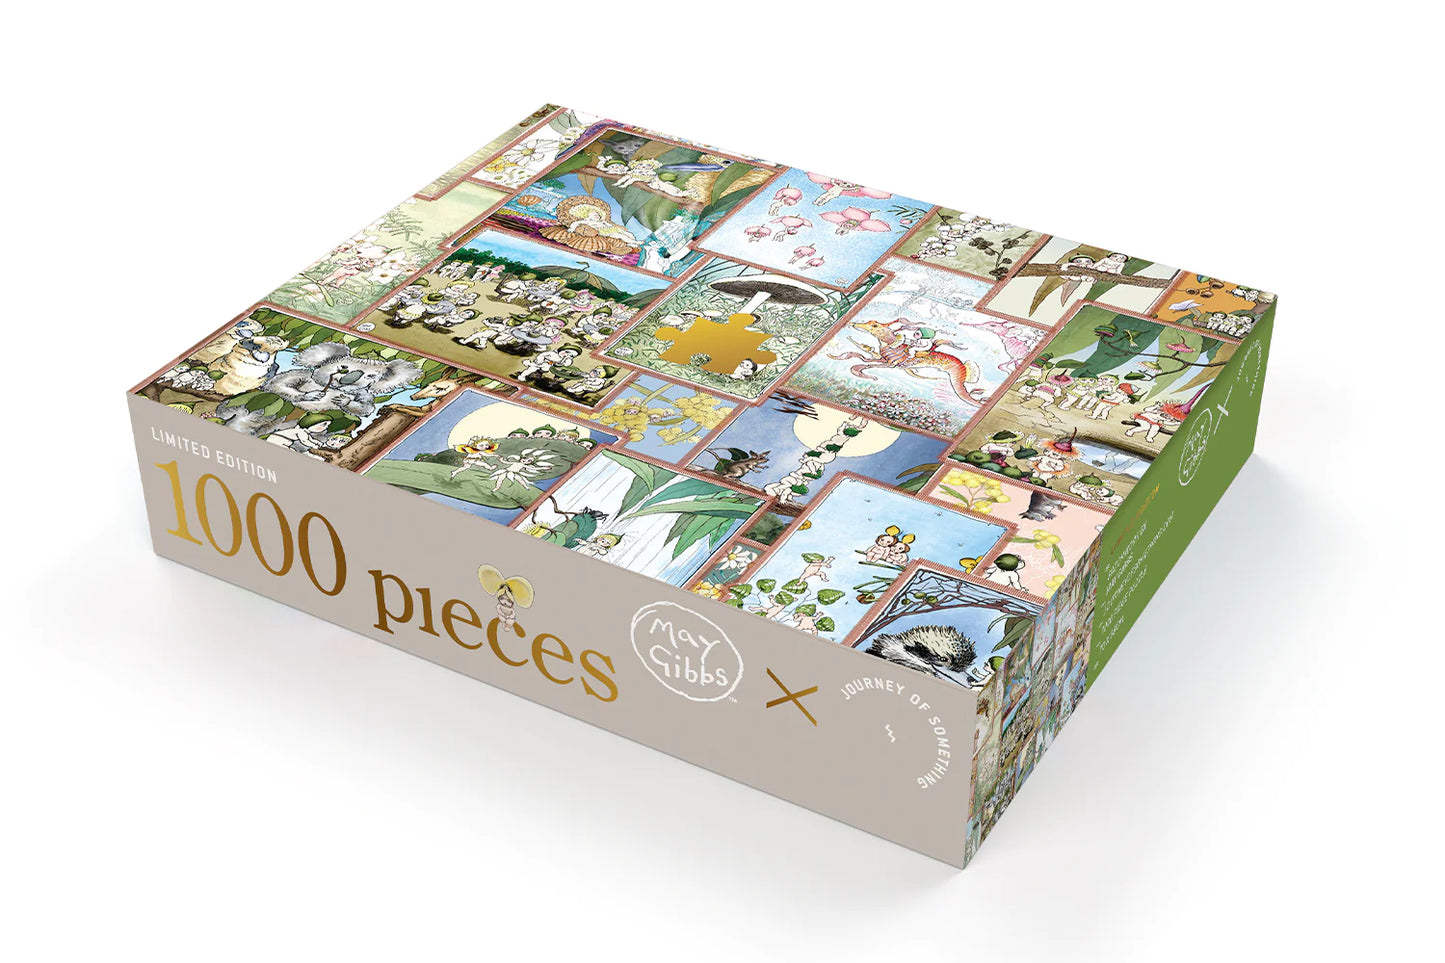 1000 PIECE PUZZLE - MAY GIBBS PATCHWORK